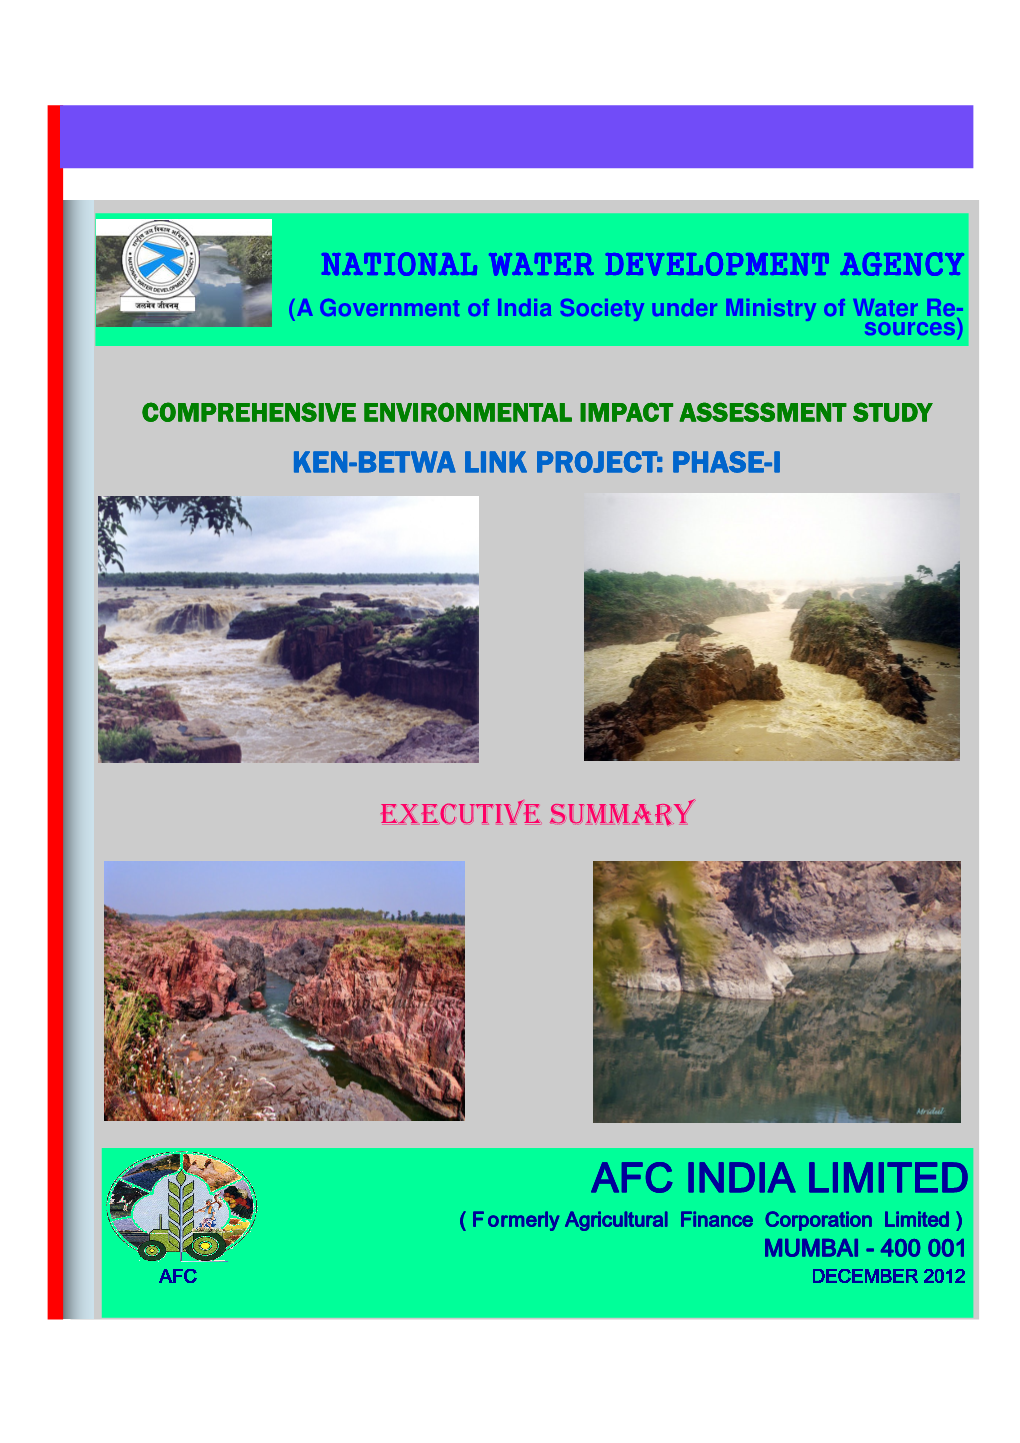 EIA) Studies and Preparation of Suitable Environmental Management Plans (EMP) to Mitigate Adverse Affects, If Any